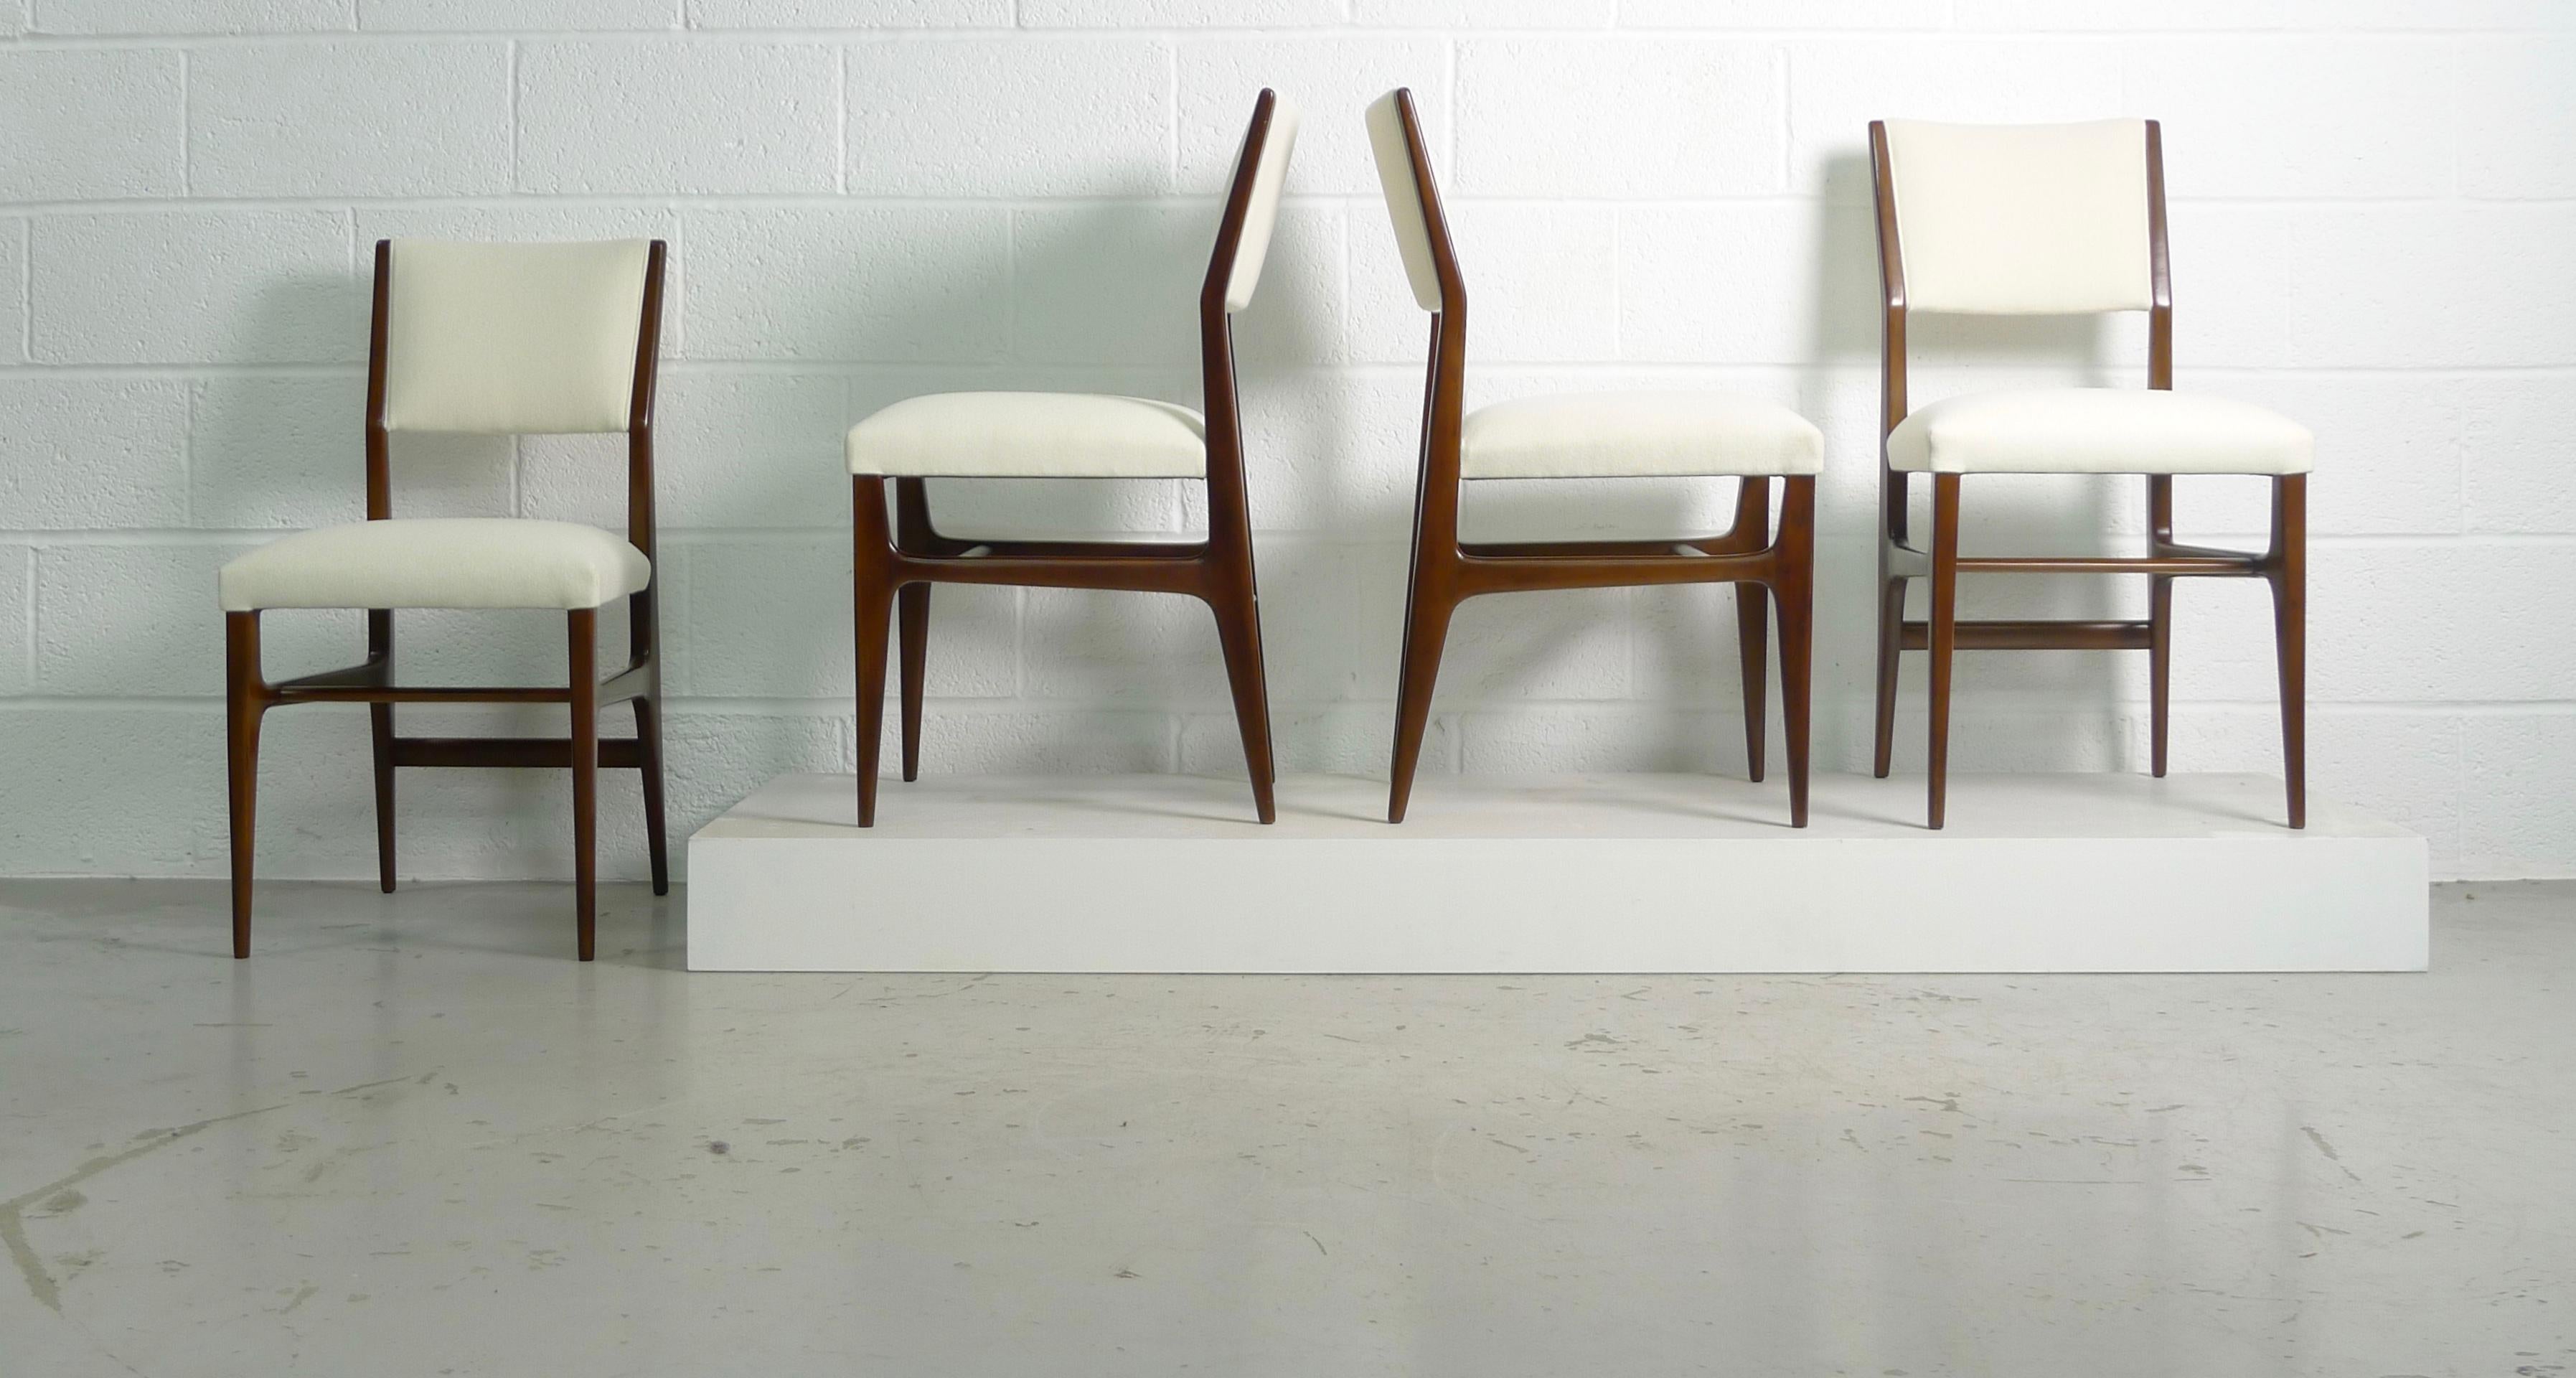 Gio Ponti designed set of 4 dining or side chairs, made in Italy for Singer & Sons of New York, 

Model #116 with newly restored dark walnut frames and seats and backs newly reupholstered in Kvadrat cream wool . 

2 of the chairs have the